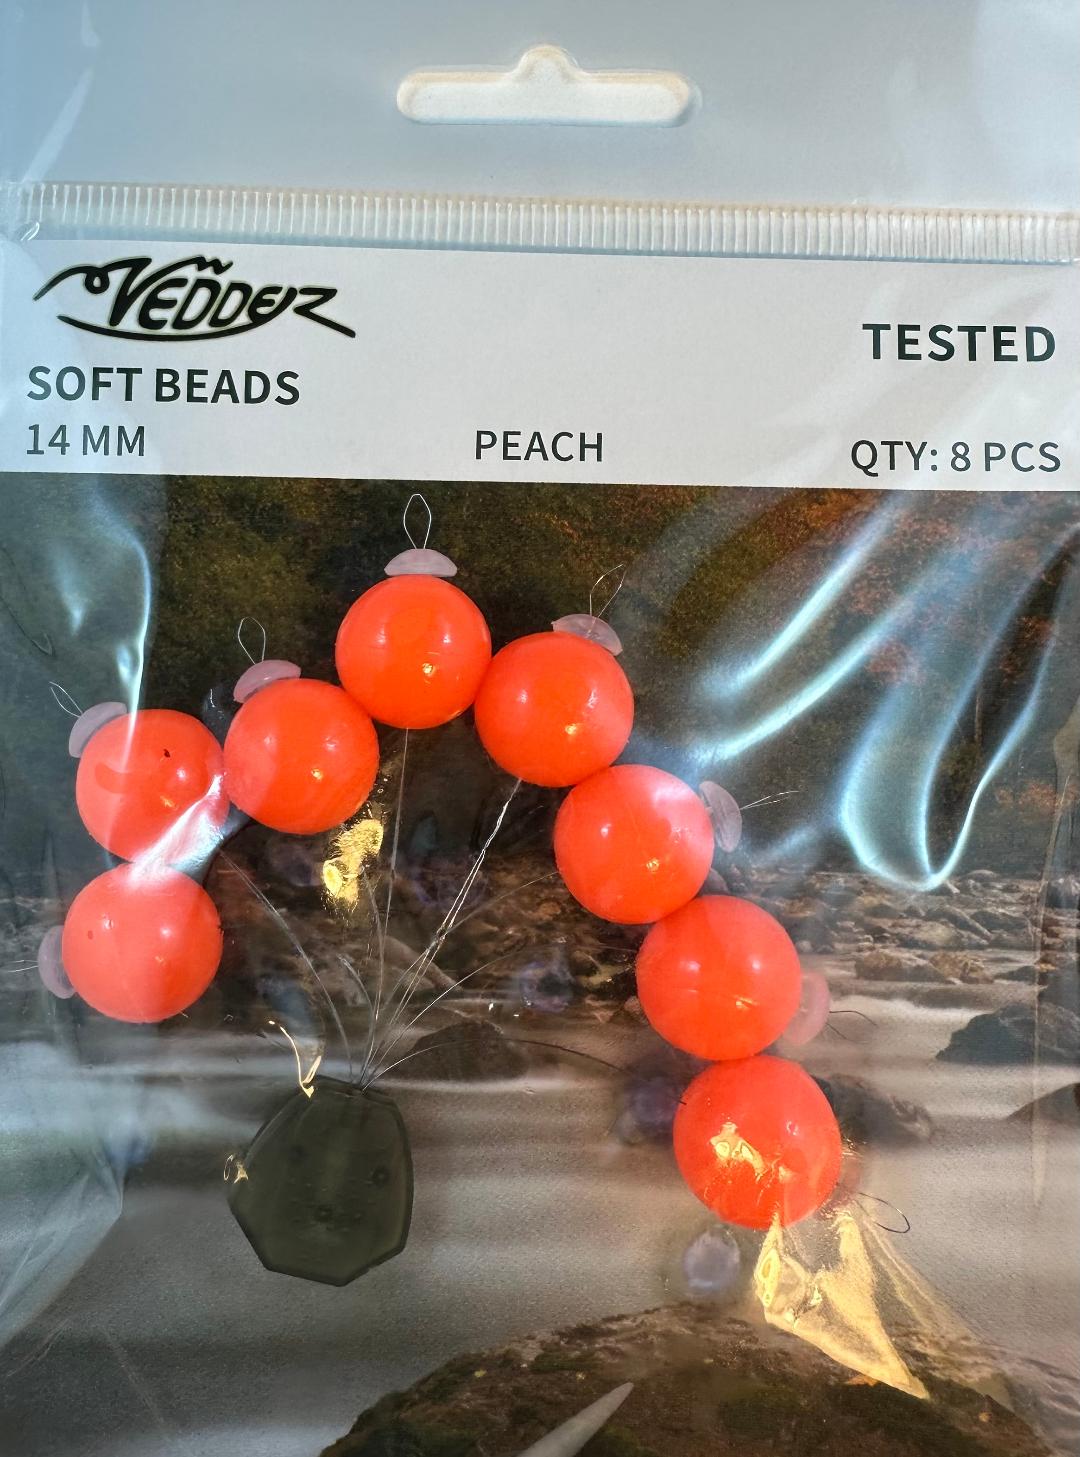 VSB-Peach 14 Vedder 14 mm Peach Soft Beads x 8 with Stoppers x 8